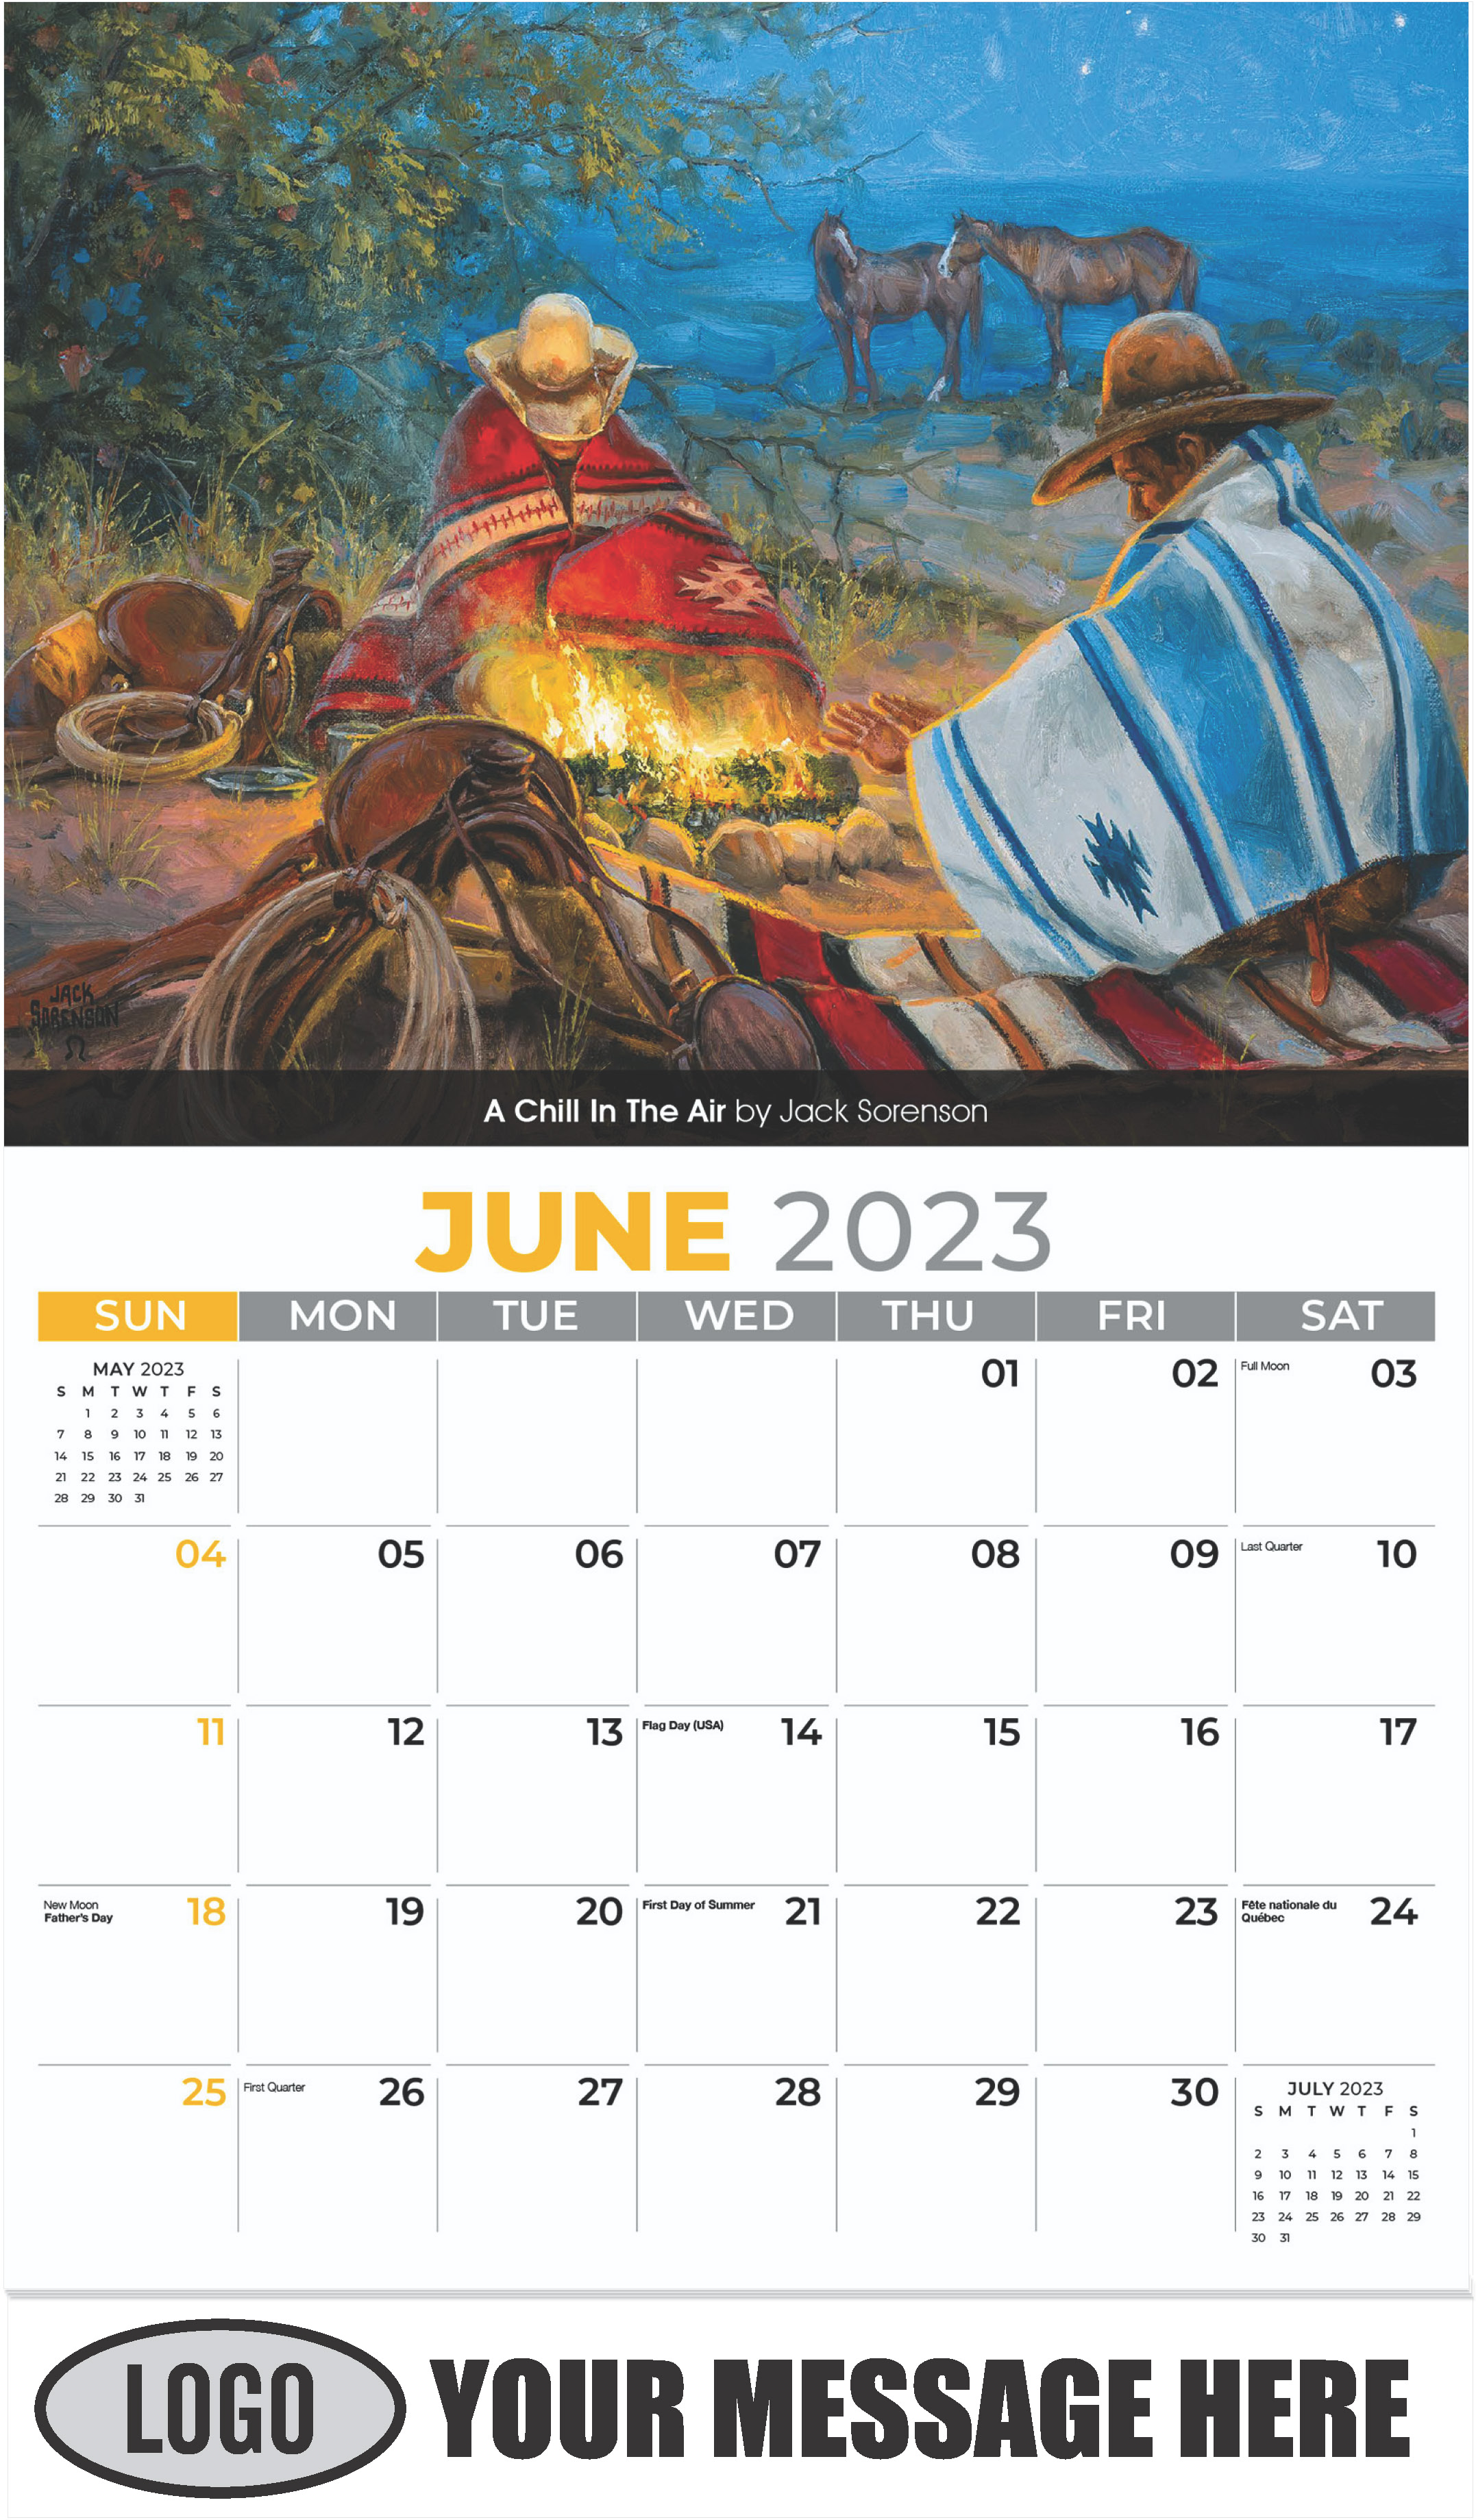 A Chill In The Air by Jack Sorenson - June - Spirit of the West 2023 Promotional Calendar